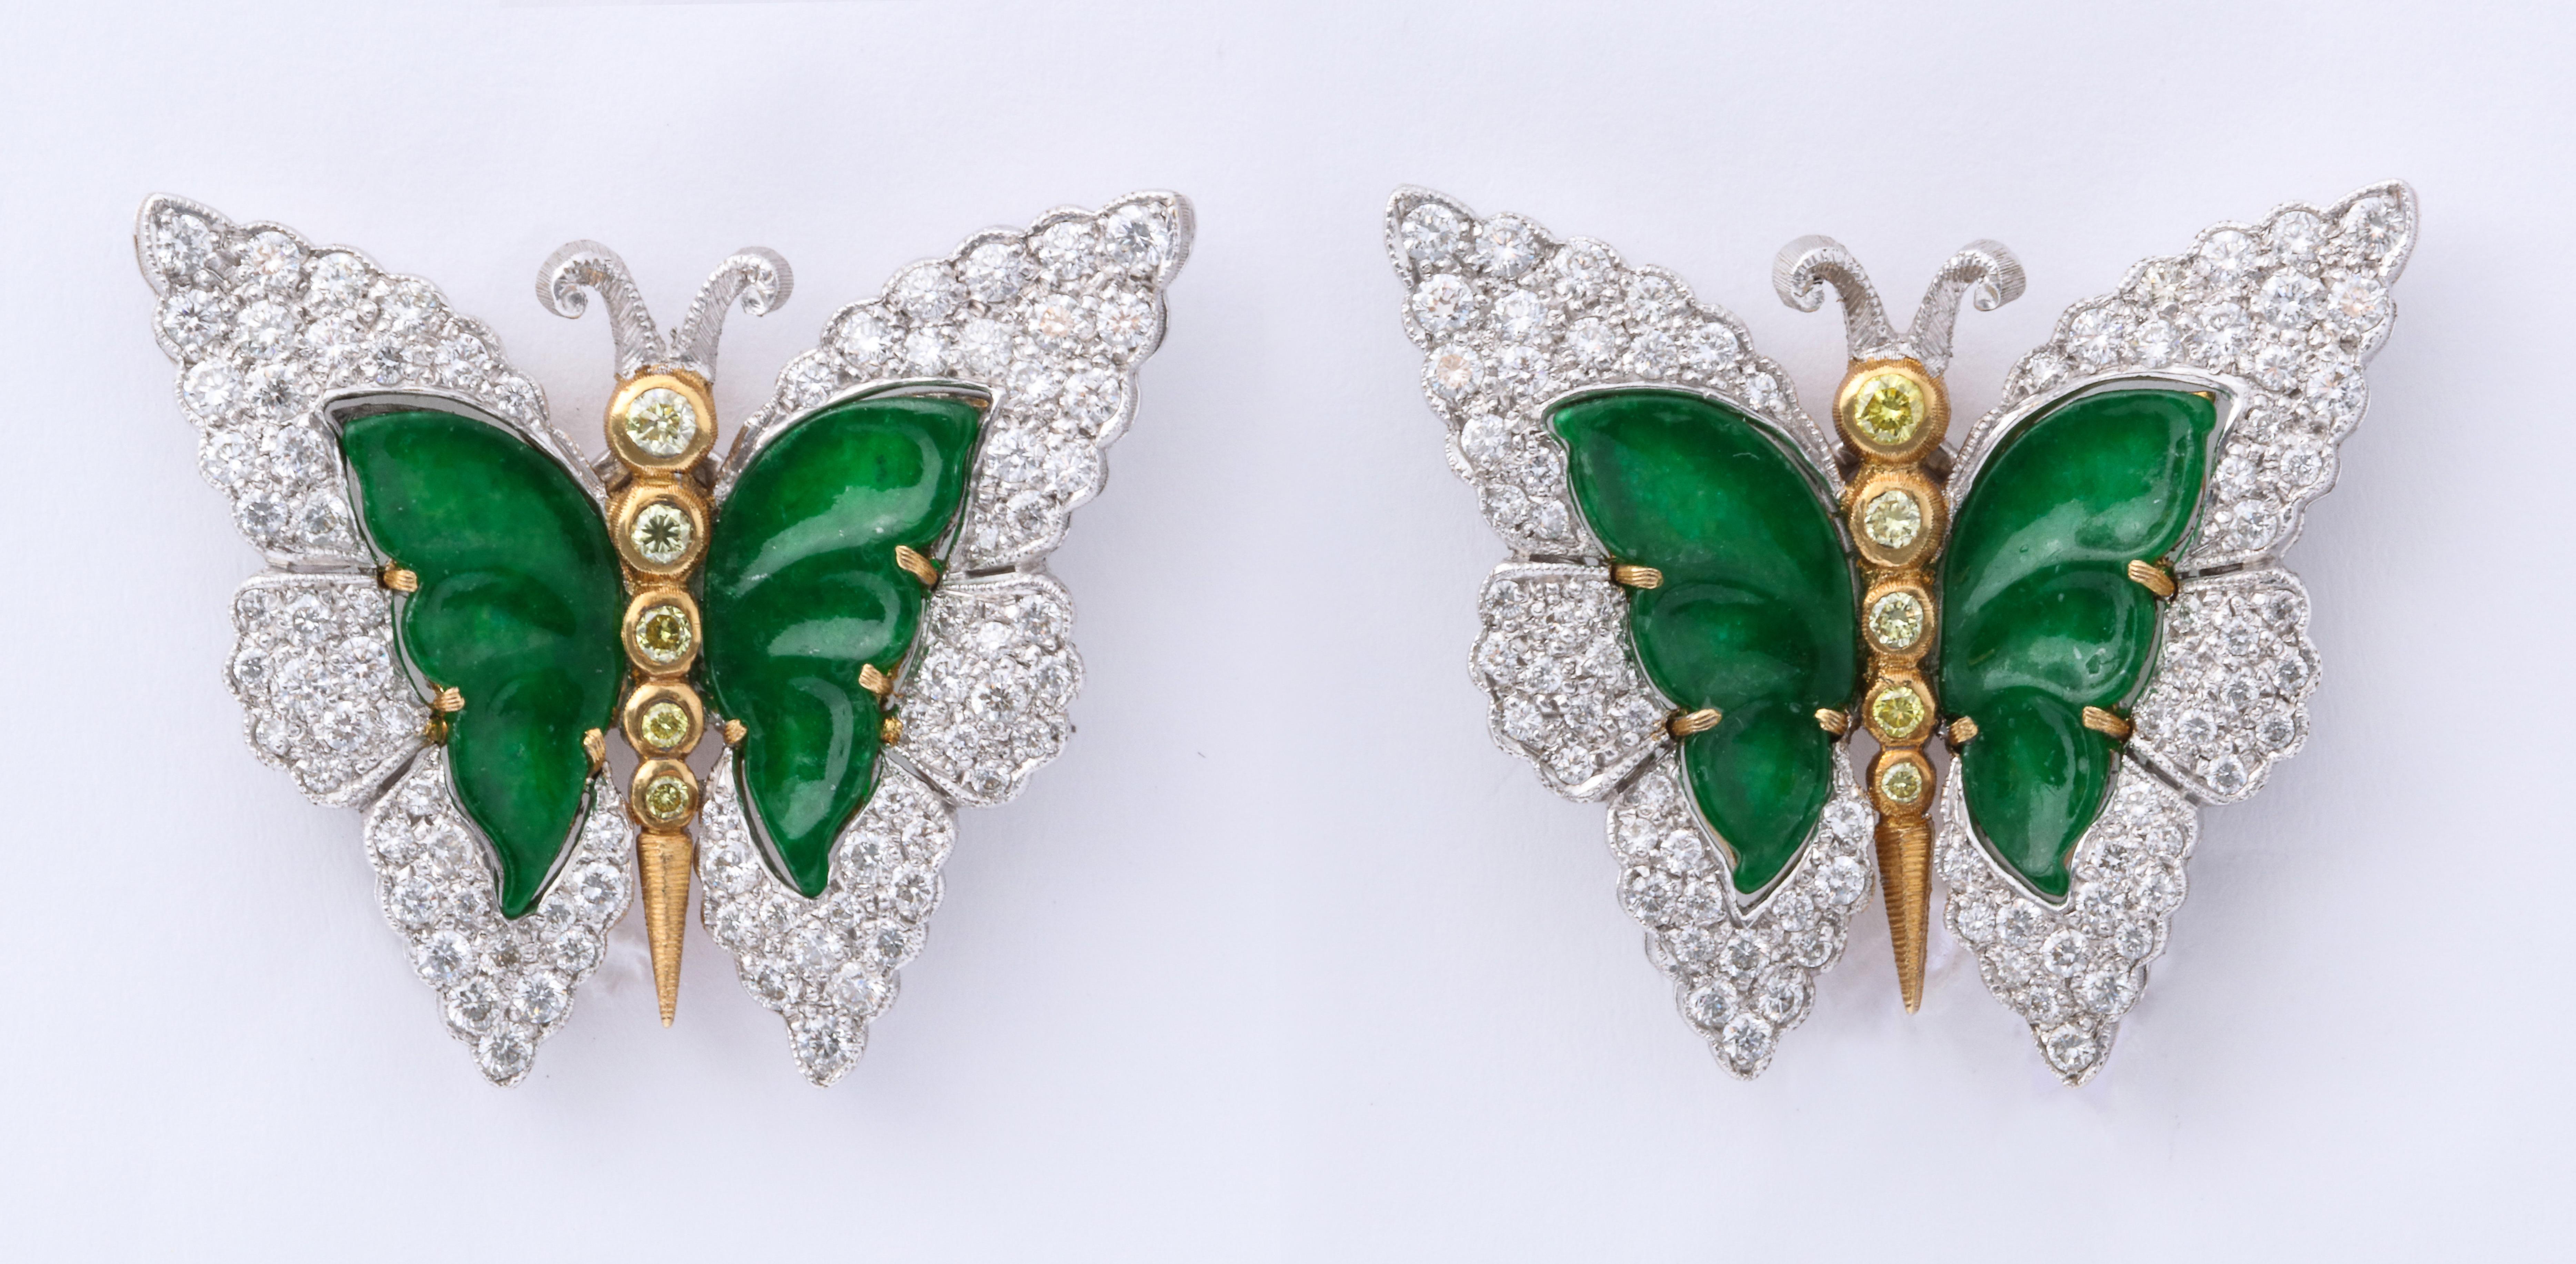 Extremely rare butterfly earrings by Buccellati featuring a yellow diamond set body, further embellished with carved green jade and diamond set wings.  Delicate and feminine on the ear, they epitomize the creativity of one of Italy's finest